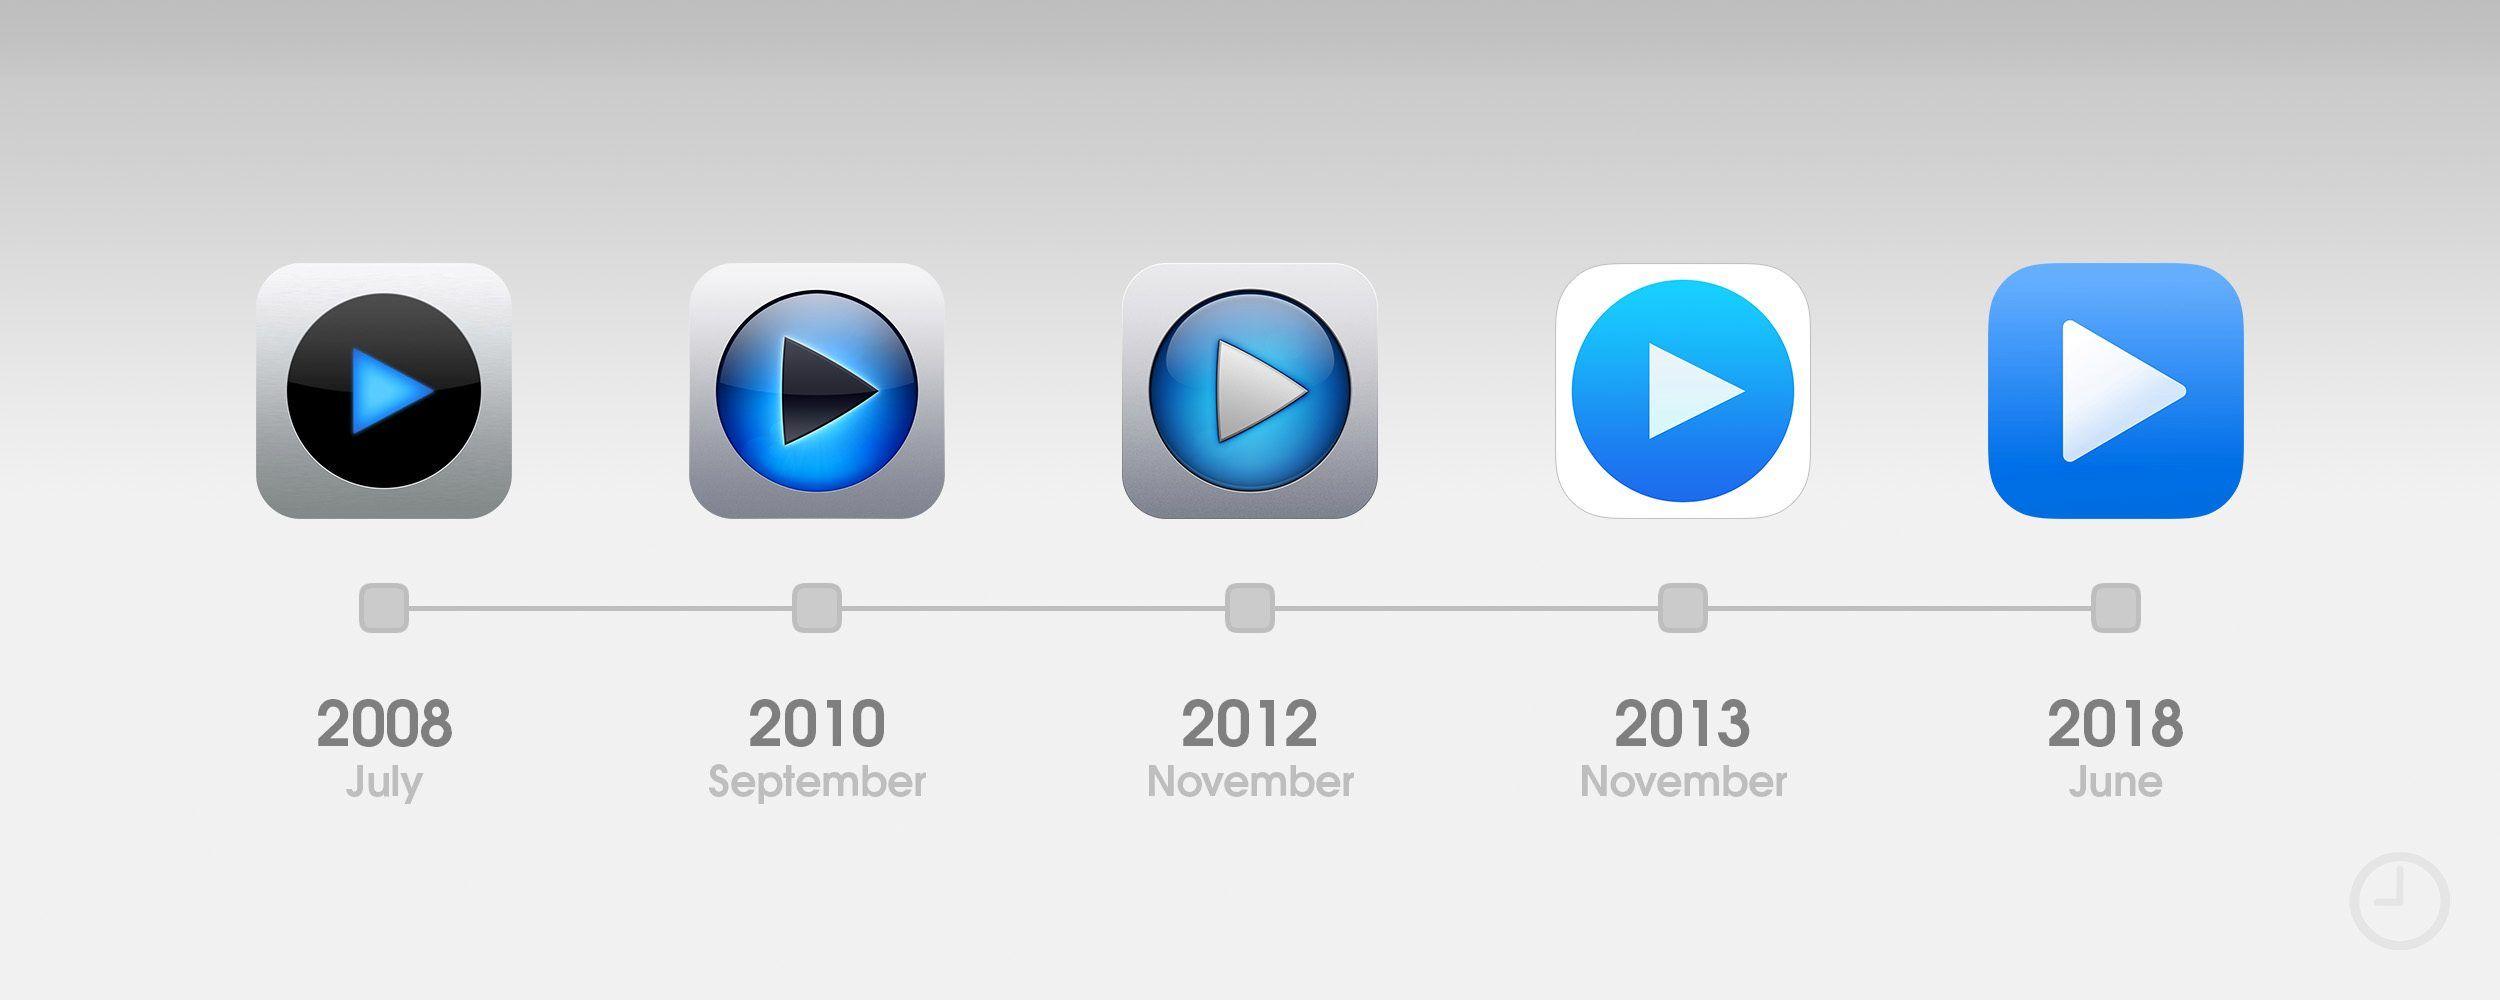 iTunes Mac Logo - 10 years of the App Store: The design evolution of the earliest apps ...